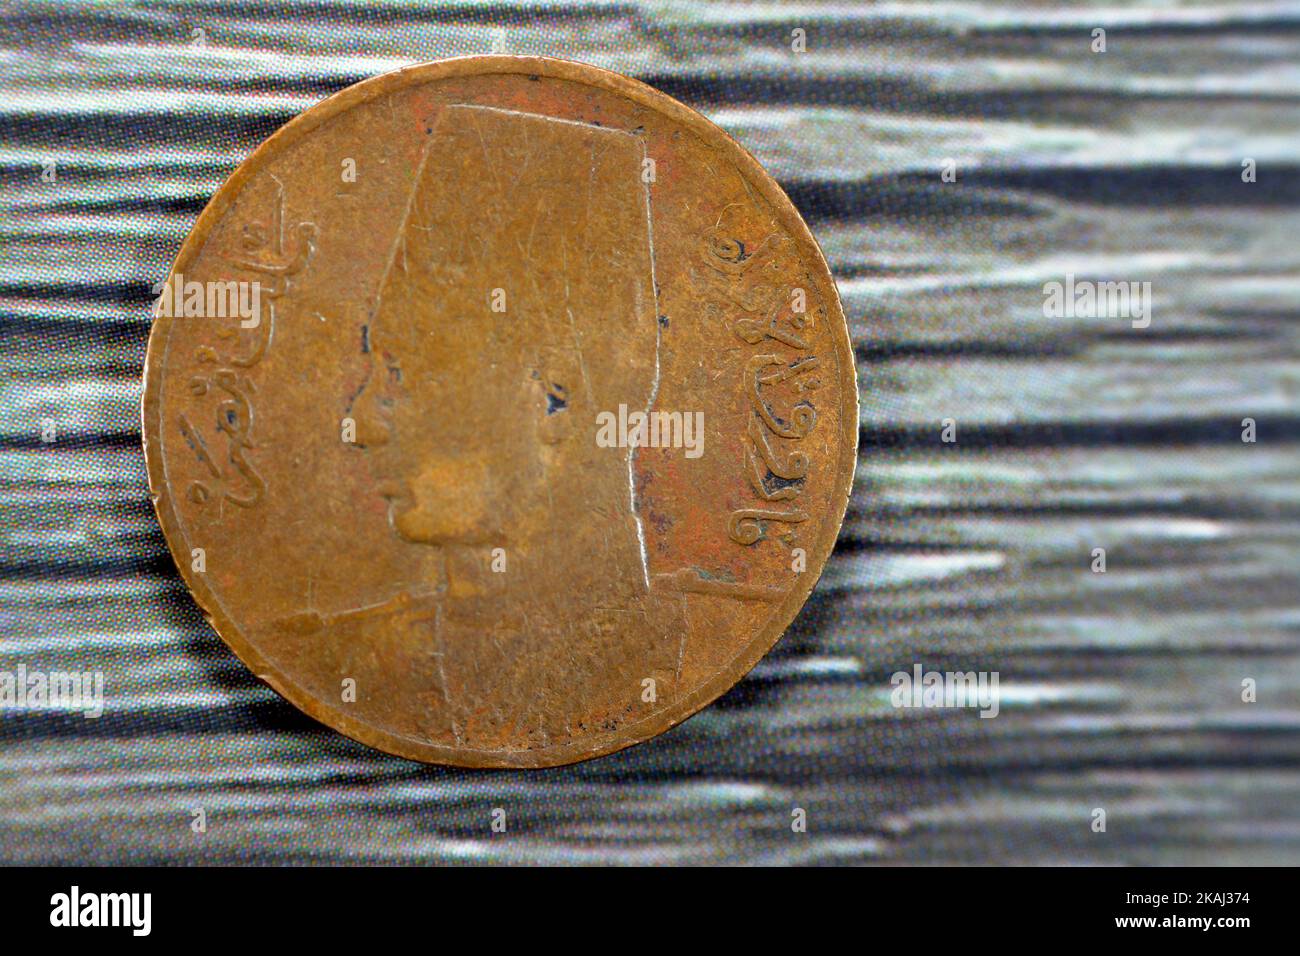 Obverse side of an old 1 One Egyptian red millieme year 1950 features Portrait of King Farouk the 1st facing left, wearing fez, the currency of kingdo Stock Photo